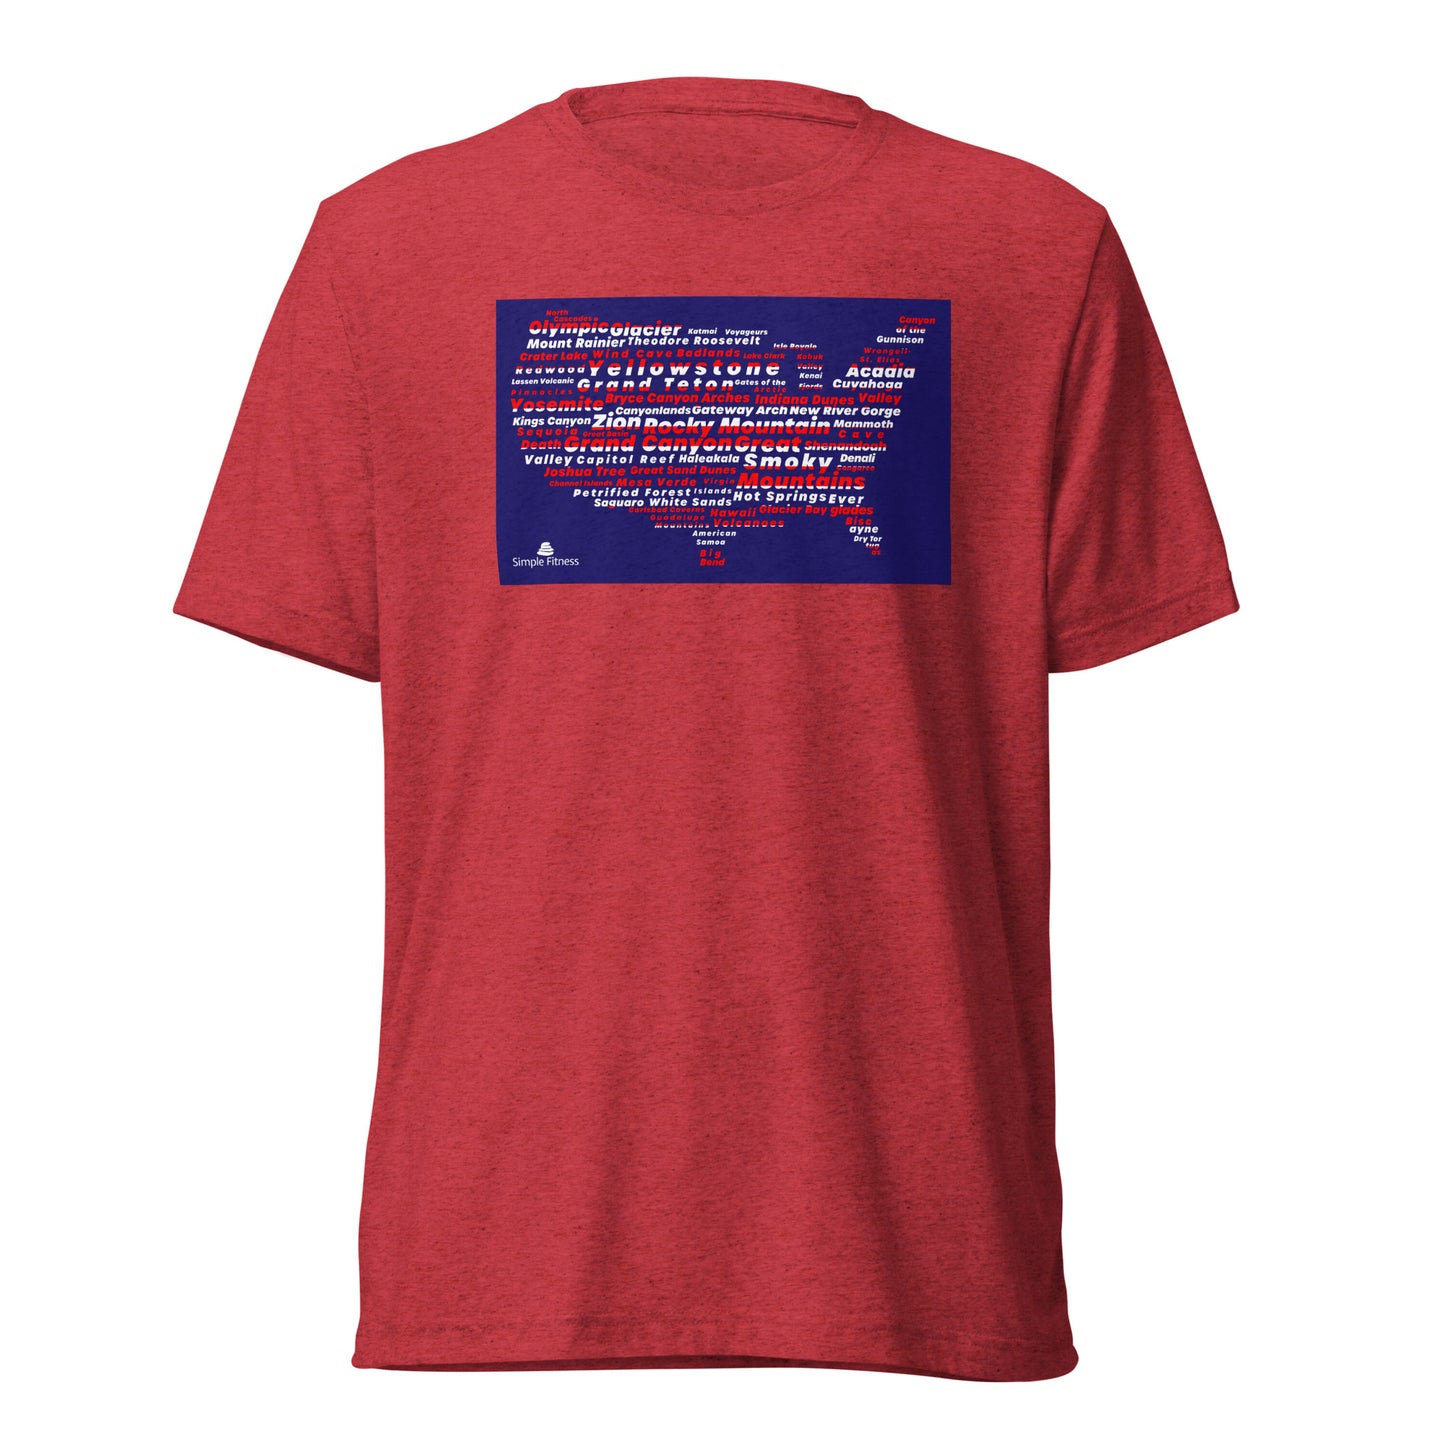 Premium Everyday All National Parks USA Red White & Blue Tee